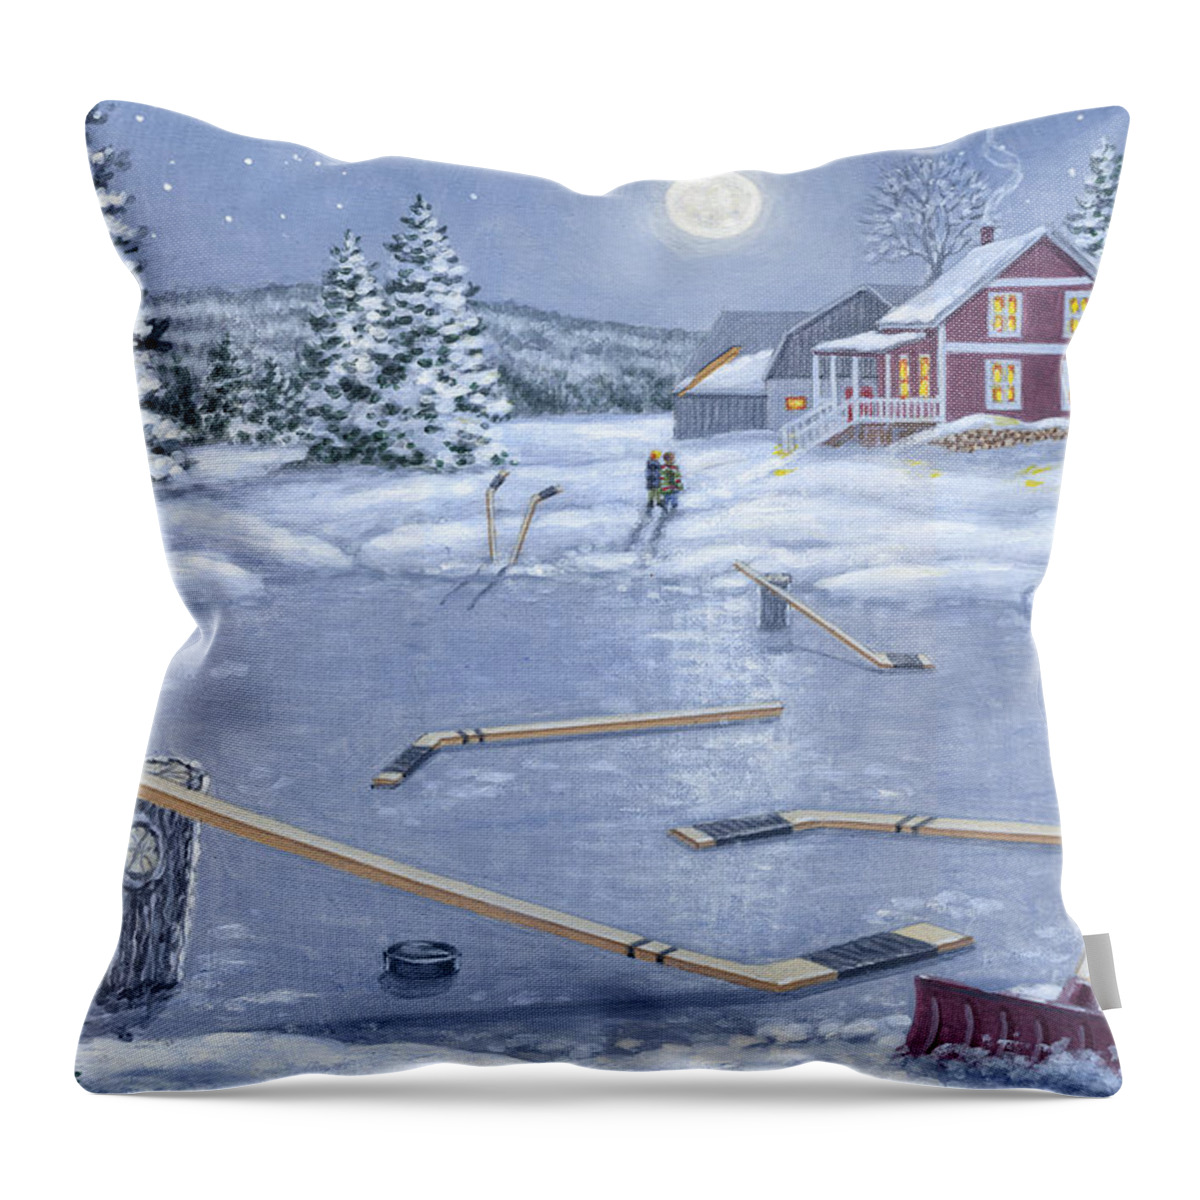 Hockey Throw Pillow featuring the painting Home For Supper by Richard De Wolfe